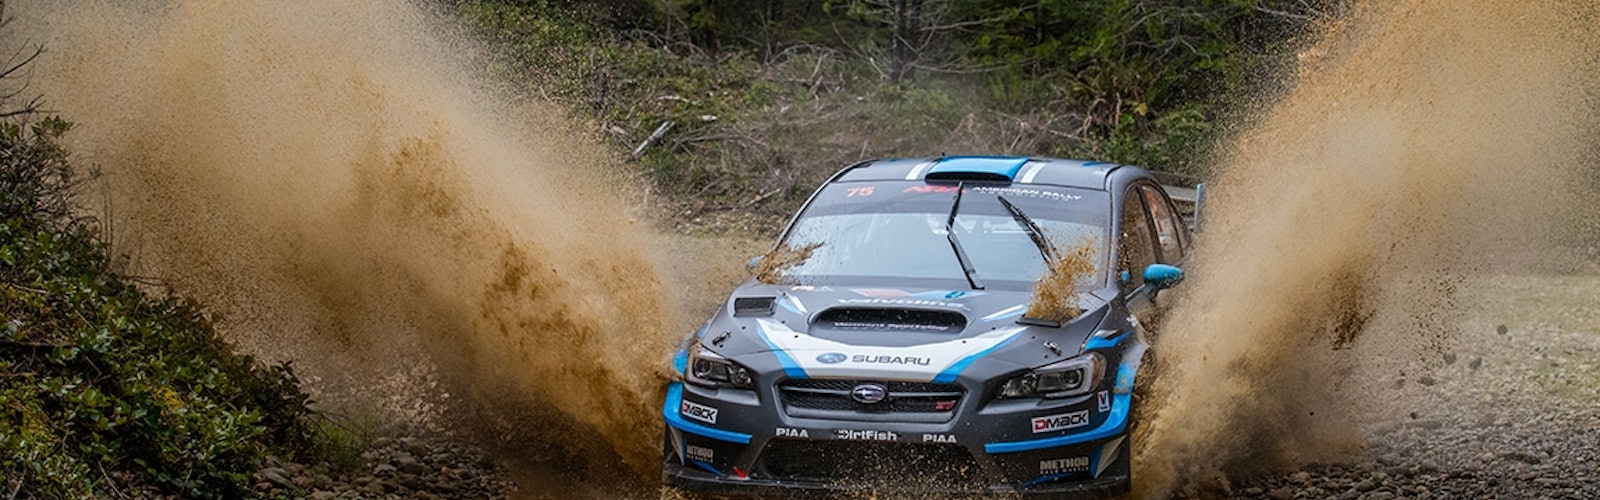 David_Higgins_powers_through_standing_water_on_the_course_at_the_Olympus_Rally_UW3A5759-2